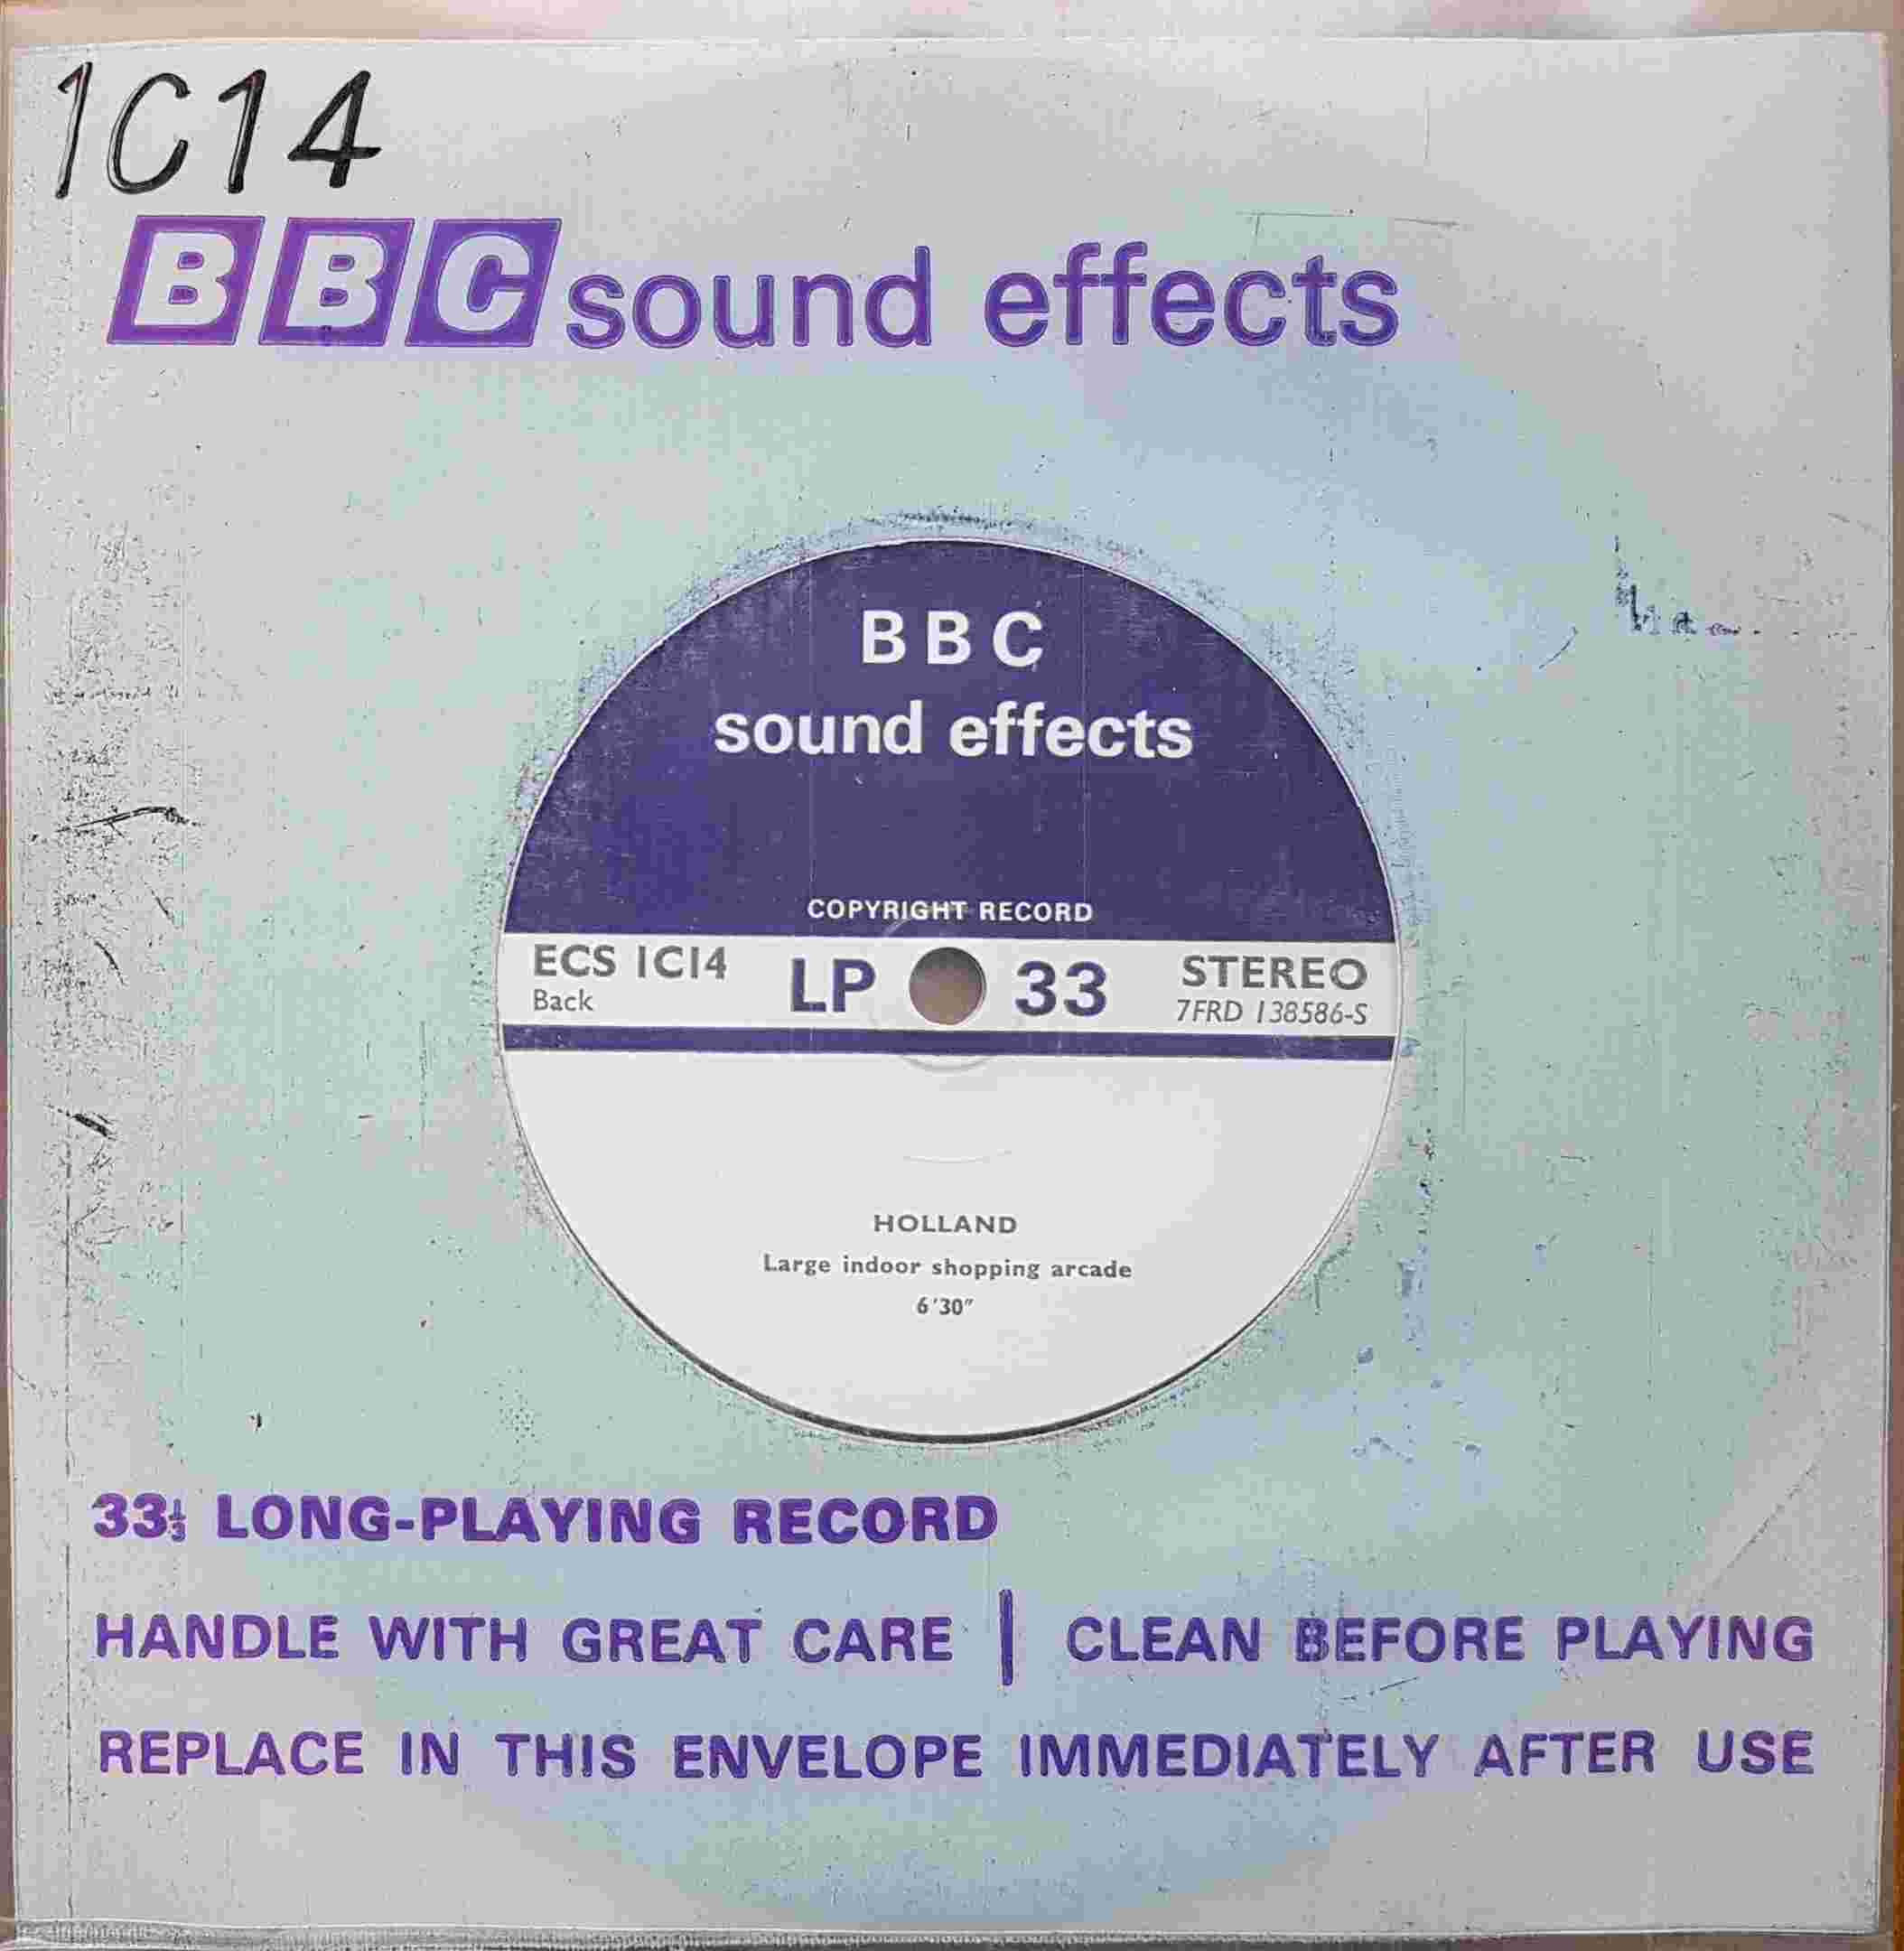 Picture of ECS 1C14 Holland by artist Not registered from the BBC singles - Records and Tapes library